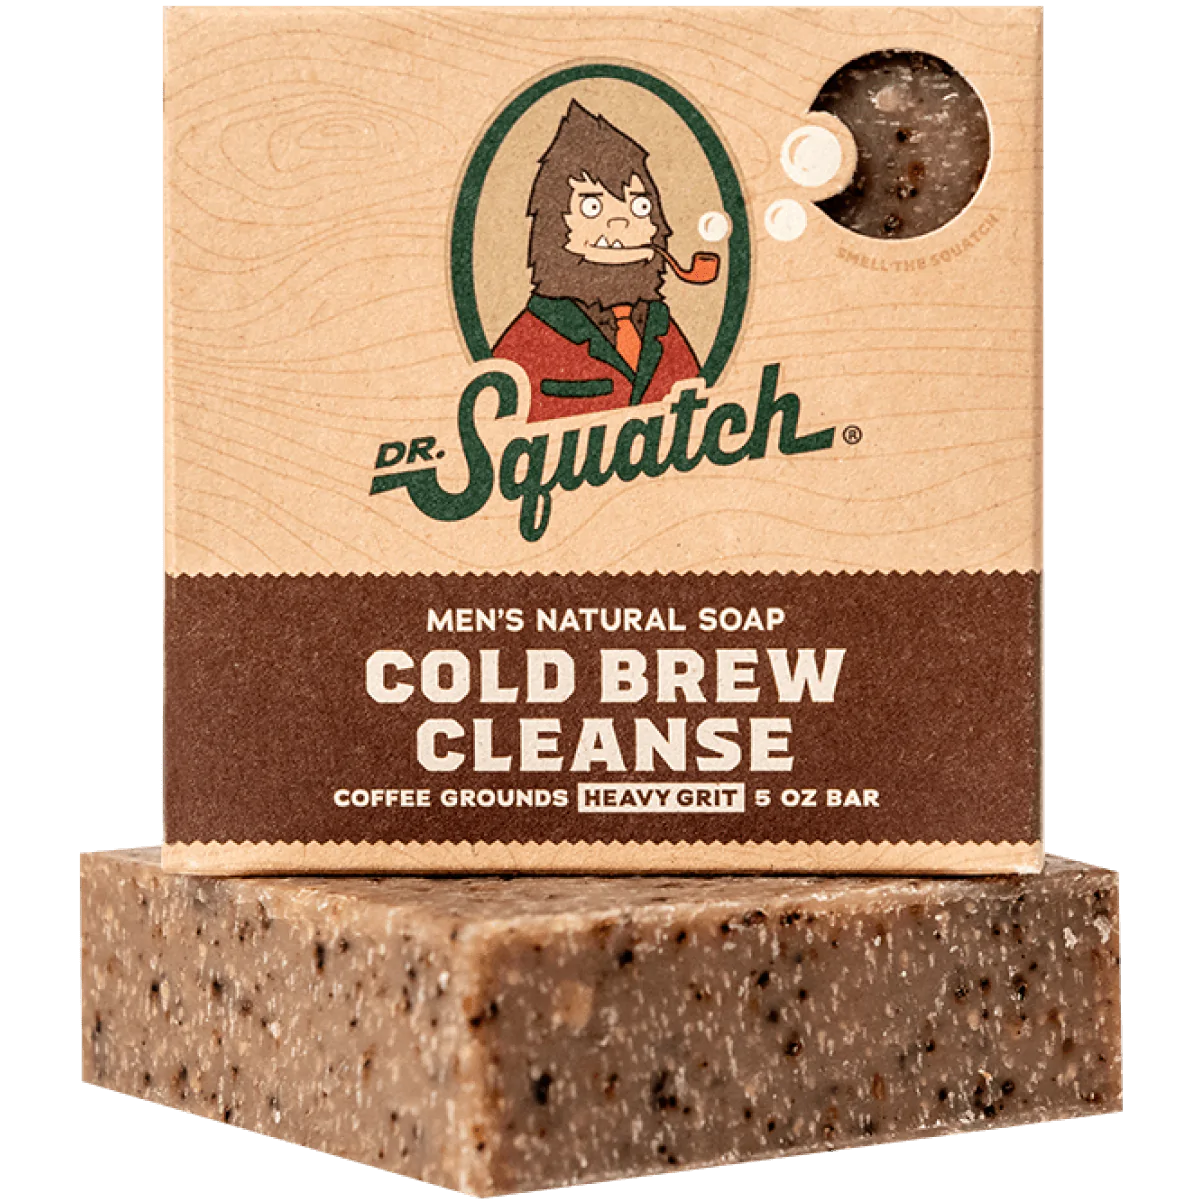 Cold Brew Cleanse Bar Soap by Dr. Squatch--Lemons and Limes Boutique